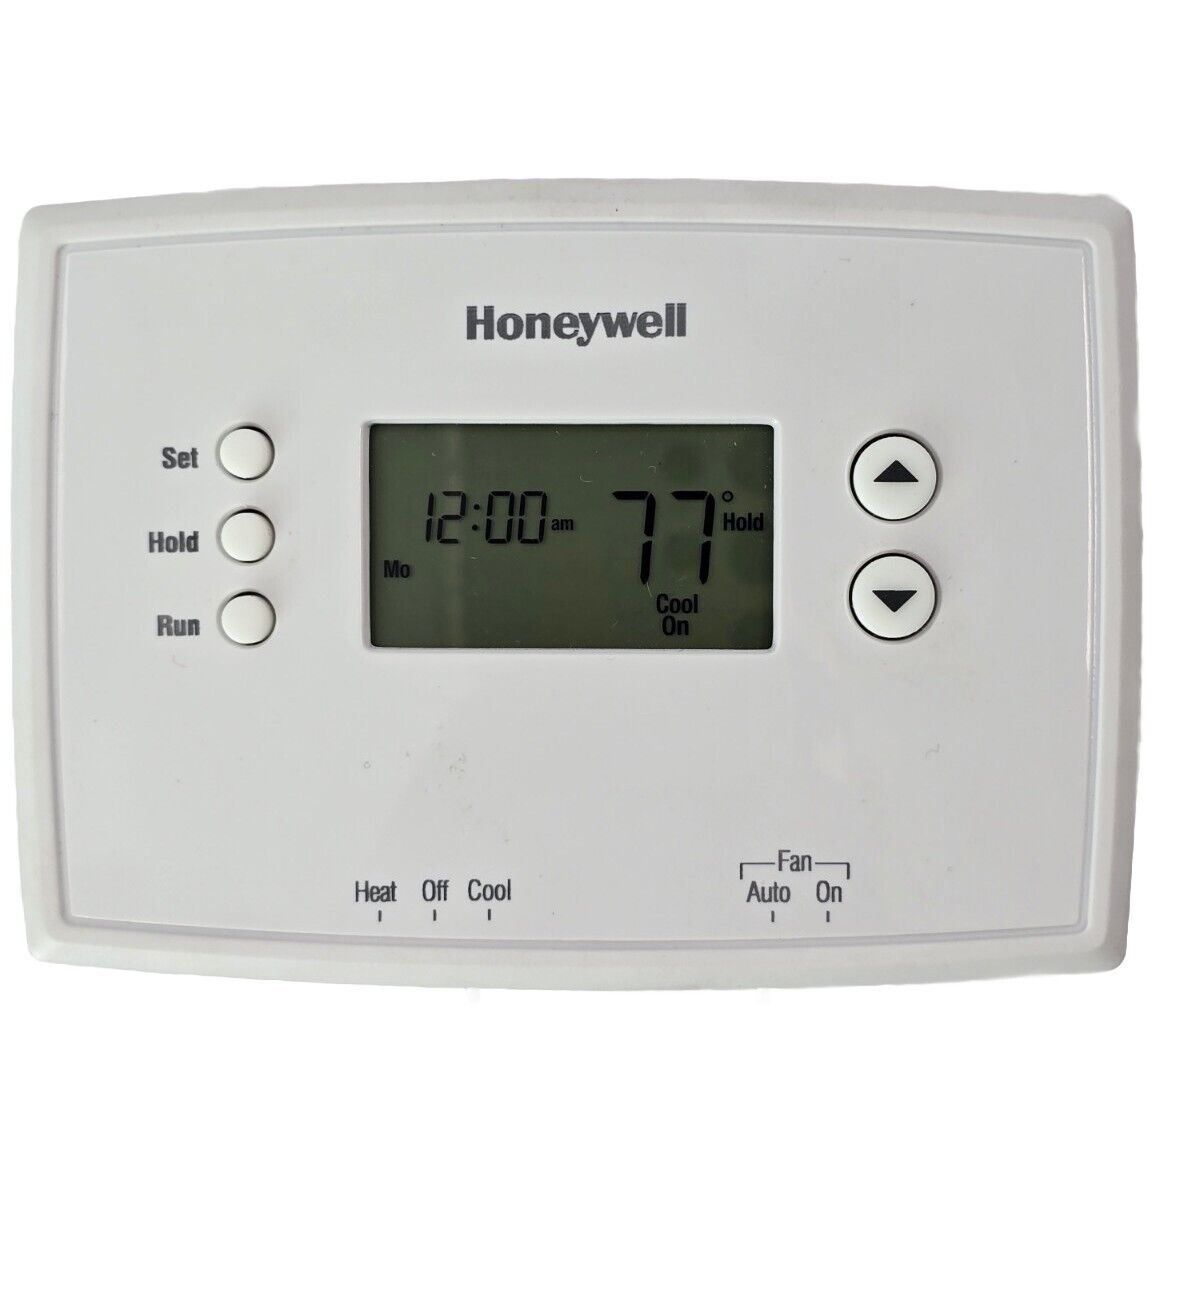 Honeywell RTH2410B1019 5-1-1 Day Programmable Thermostat with Backlight.